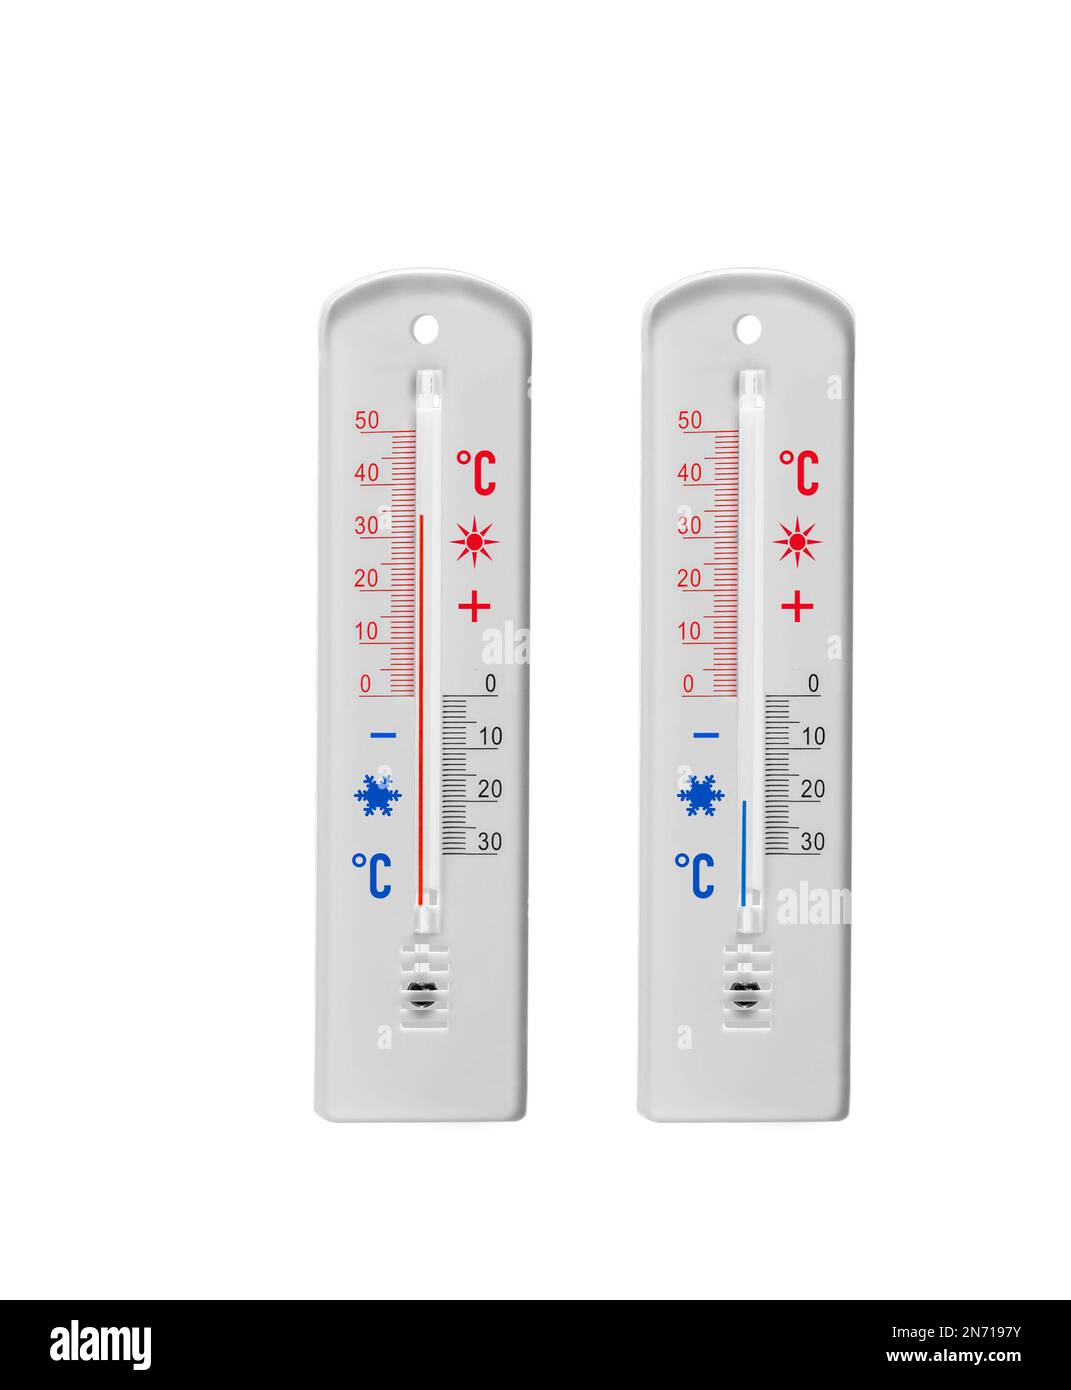 https://c8.alamy.com/comp/2N7197Y/two-thermometers-with-plus-and-minus-display-in-degrees-celsius-2N7197Y.jpg